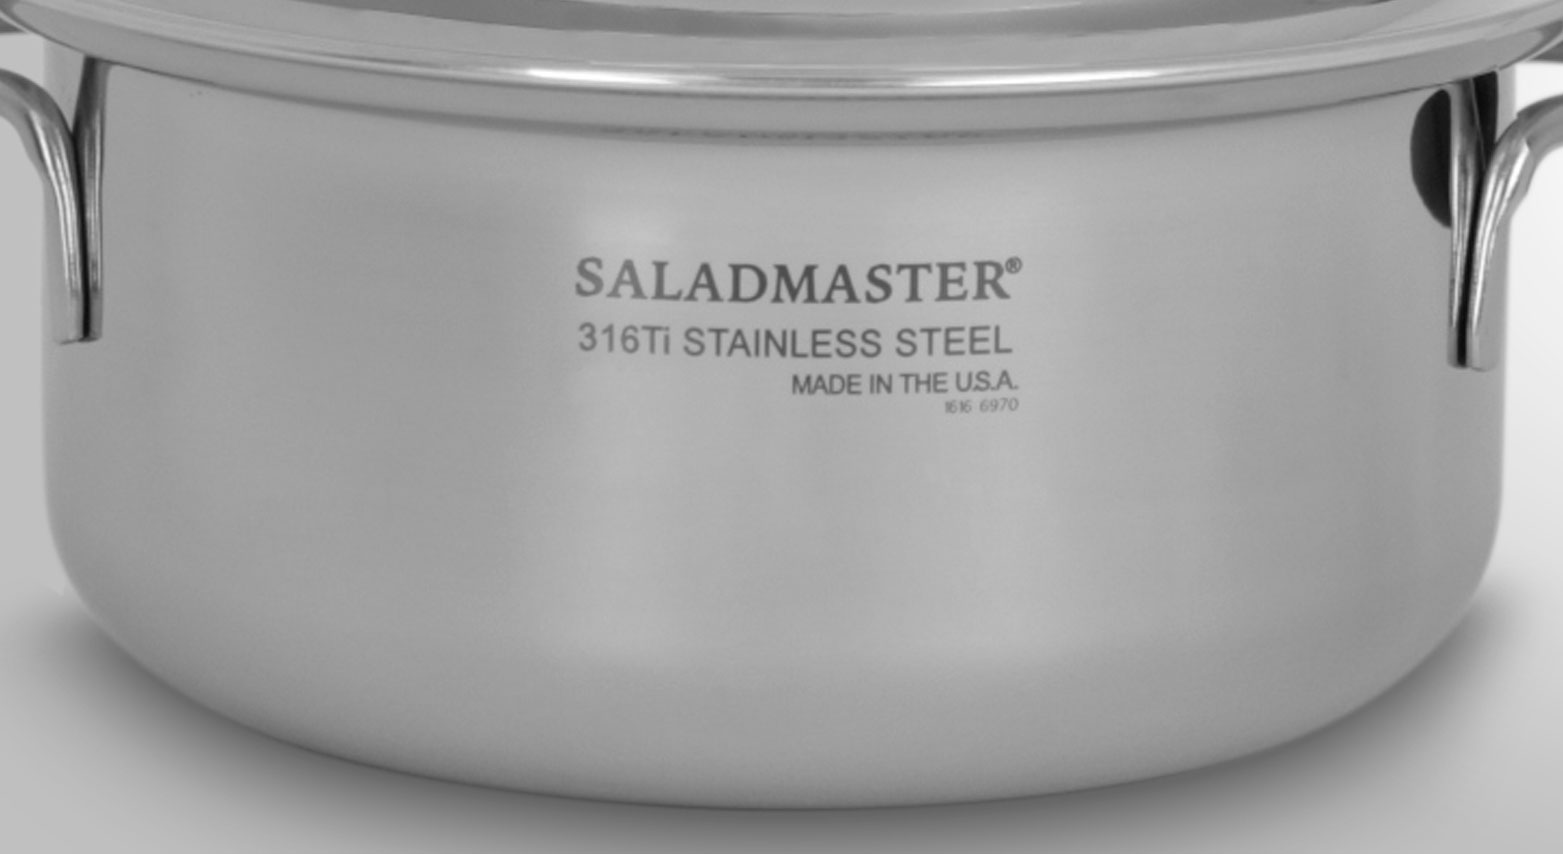 Saladmaster Features and Benefits